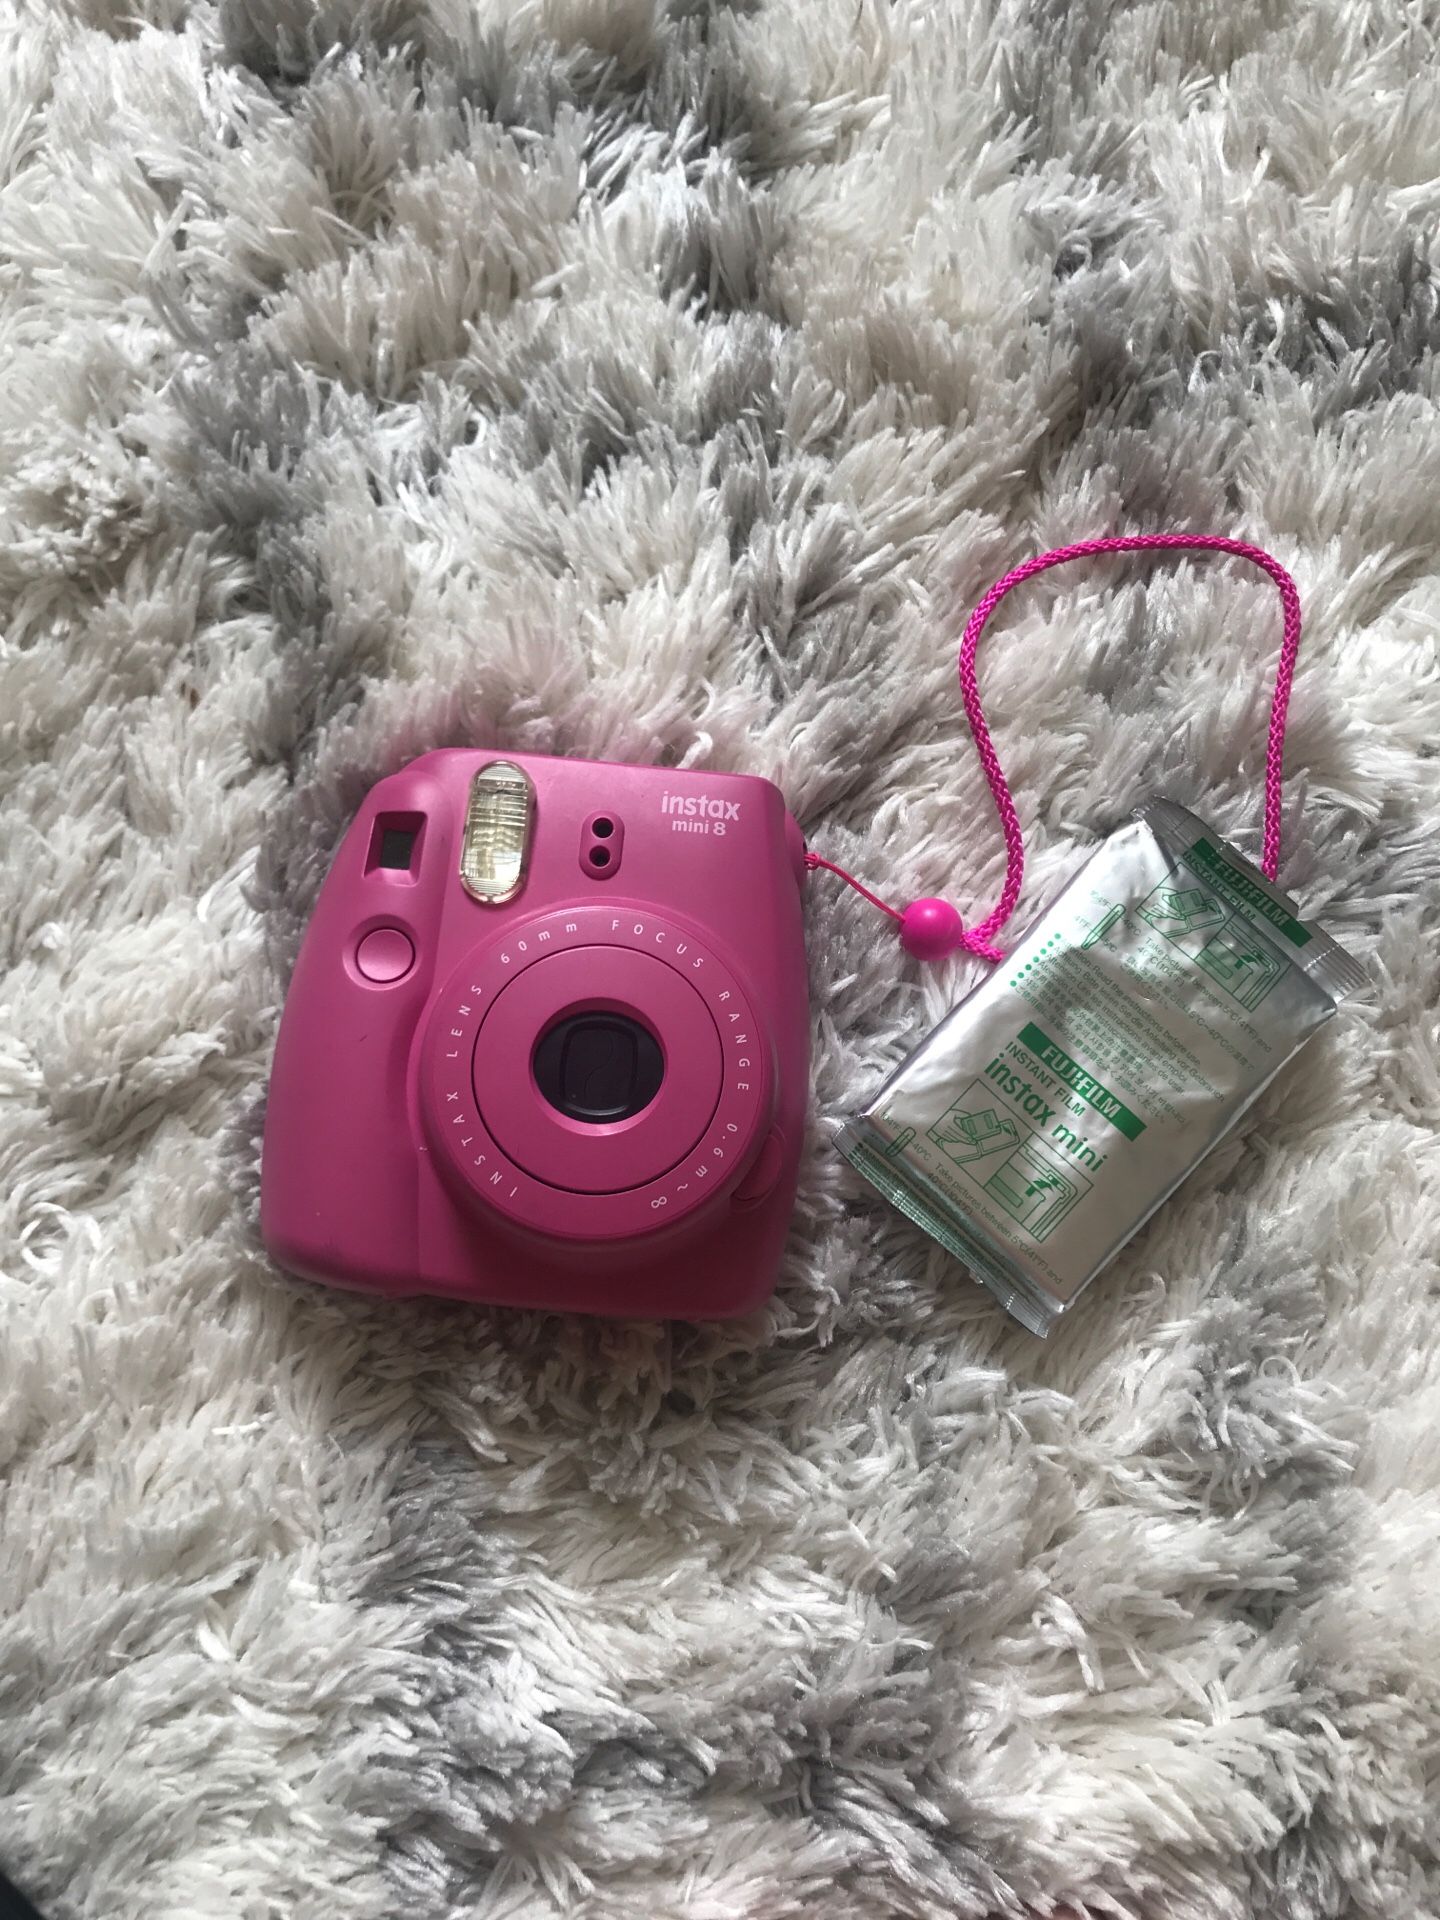 Instax mini 8, perfect condition and includes instant film